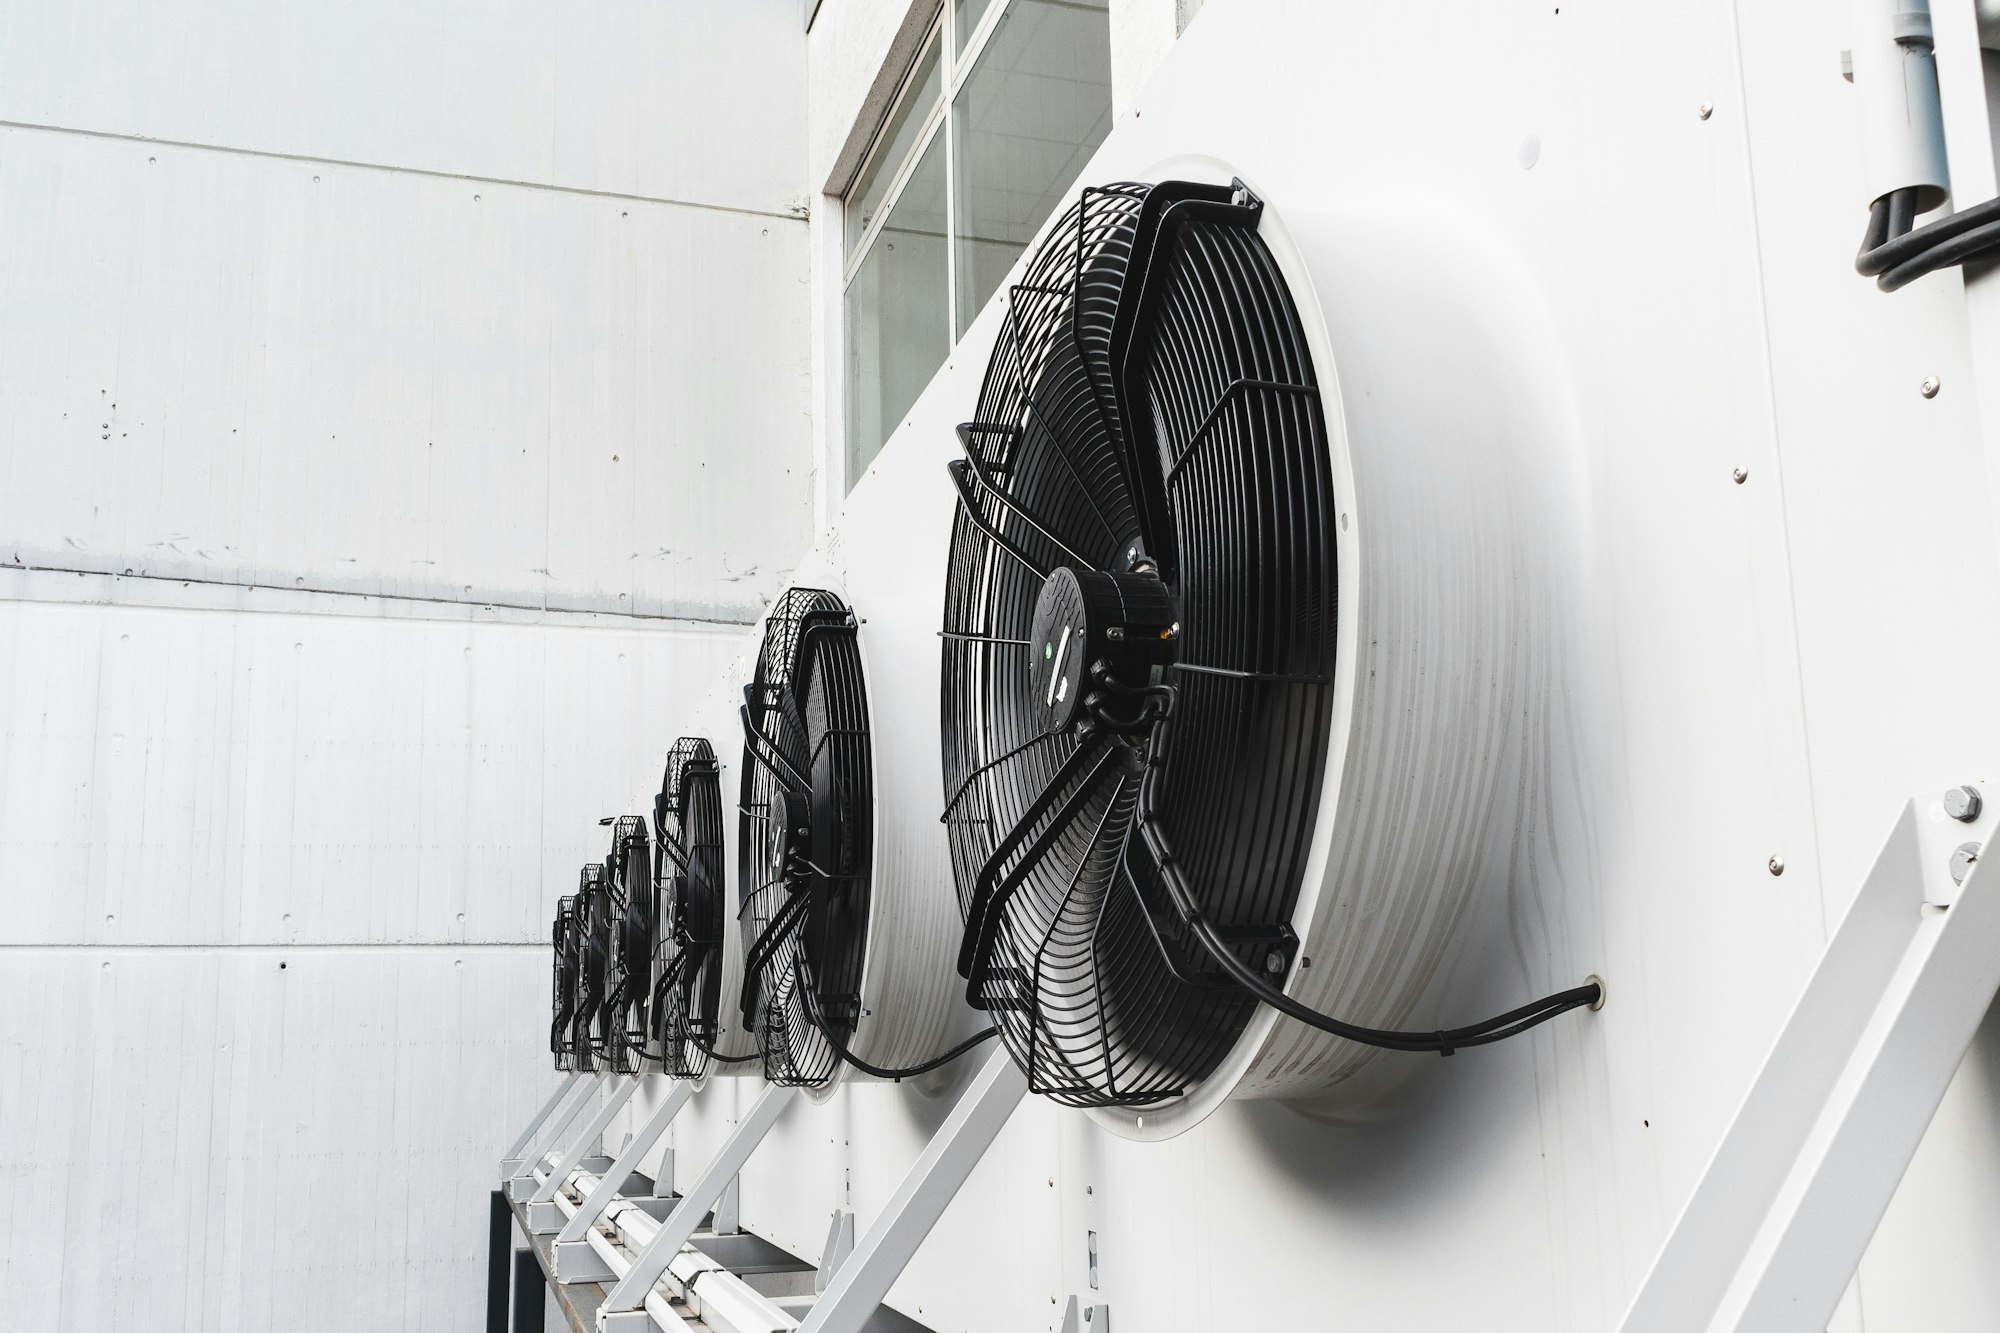 Air conditioner units (HVAC) attached to an industrial building